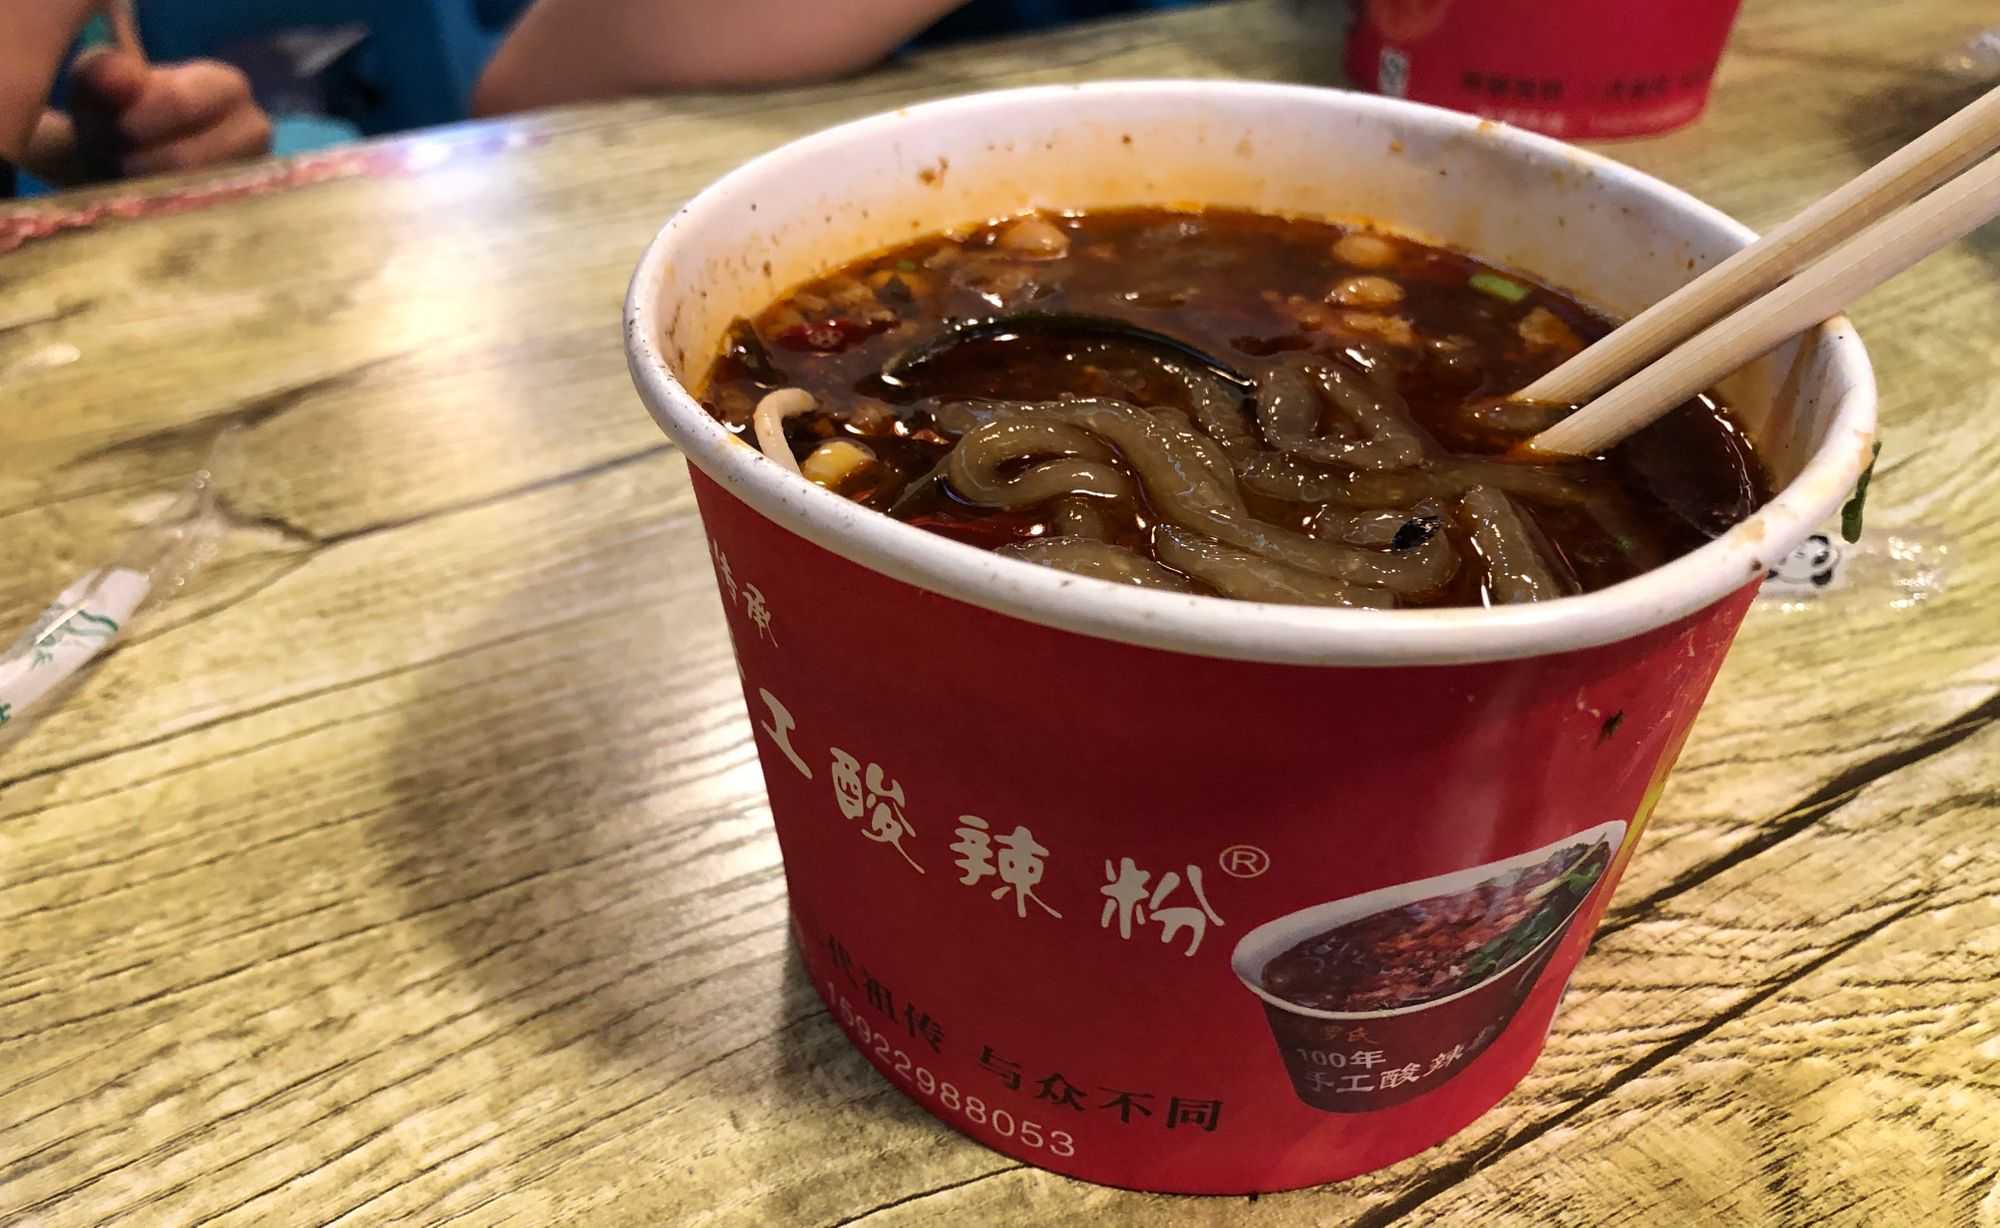 Sour and spicy noodles (酸辣粉) (Image by author)